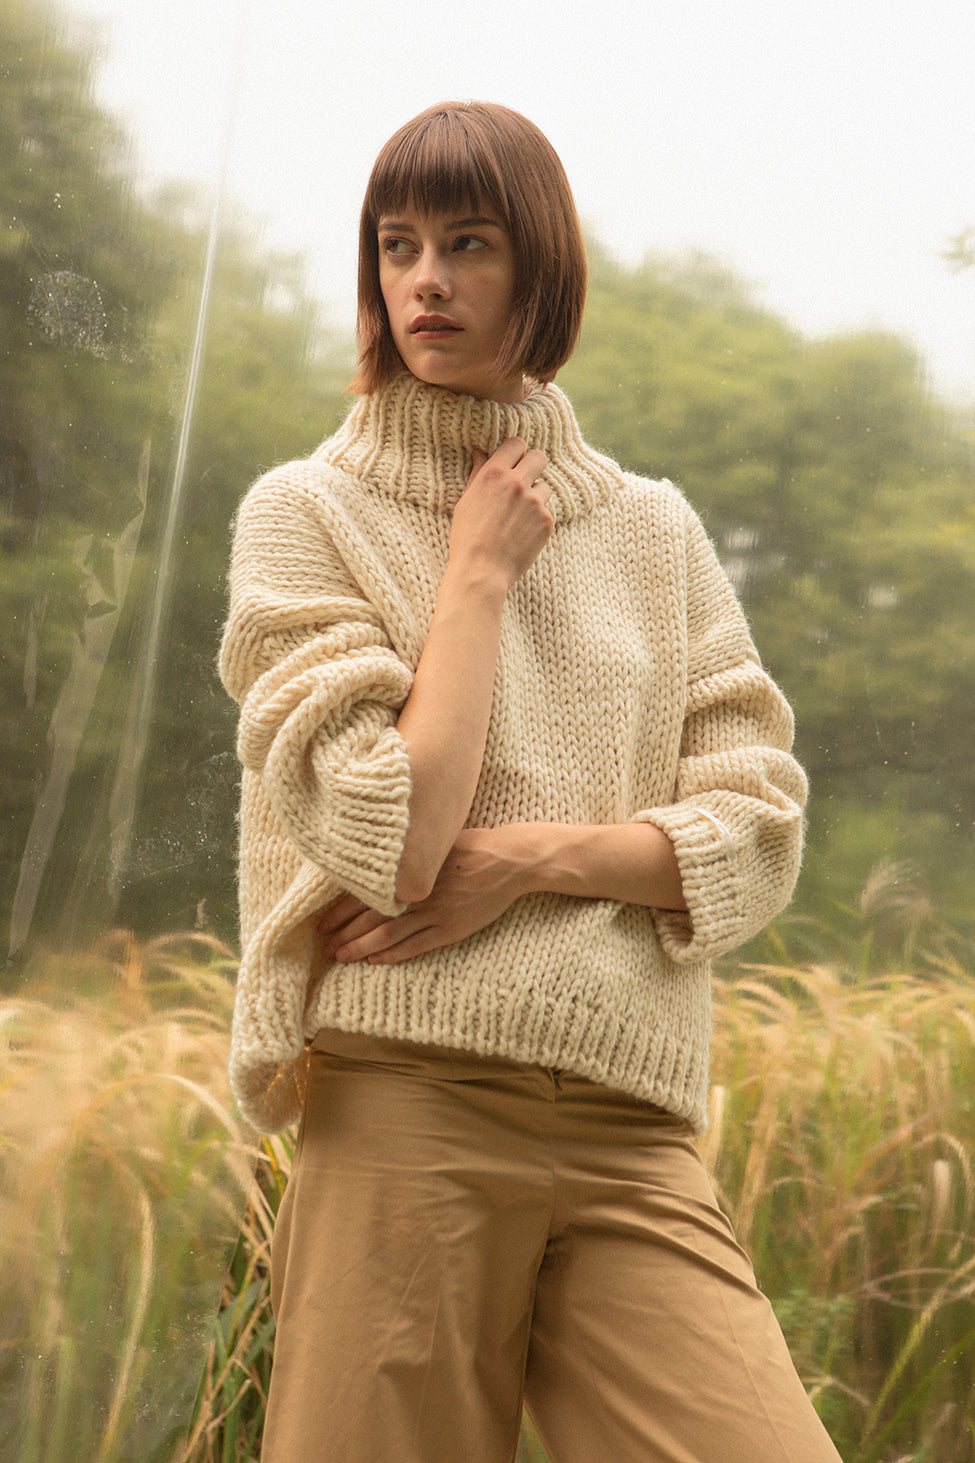 Open knit with turtleneck collar with dropped shoulders. Gently tapered long sleeves. Slightly cropped. Boxy silhouette. Relaxed fit.